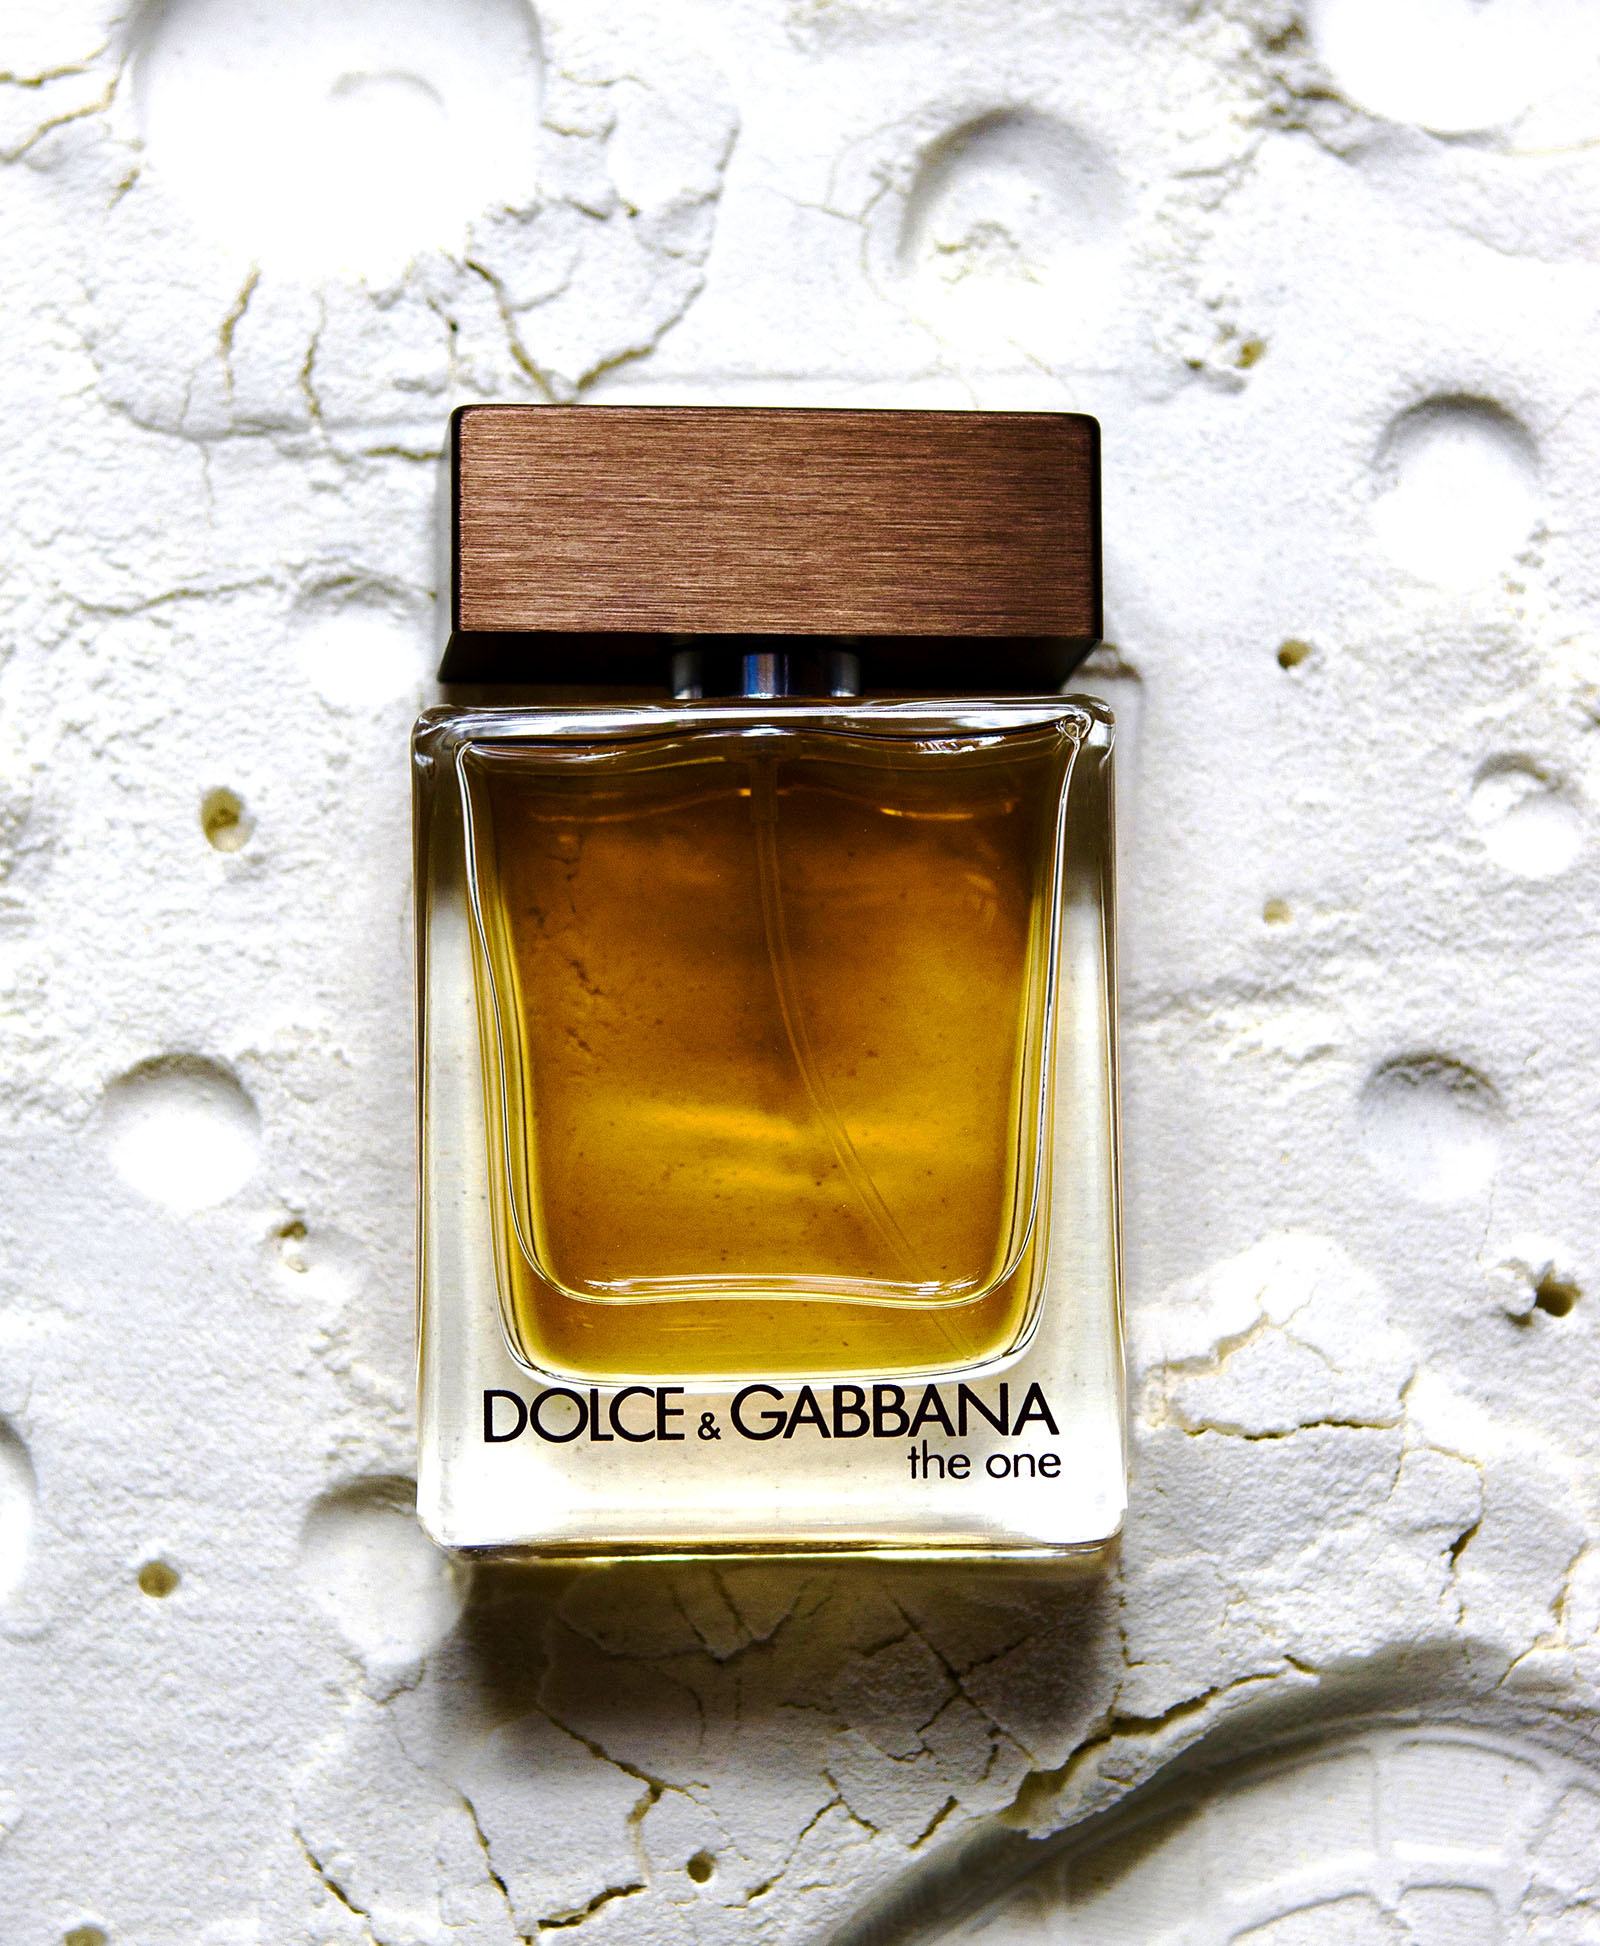 Dolce & Gabbana The One is one of the best men's fragrances